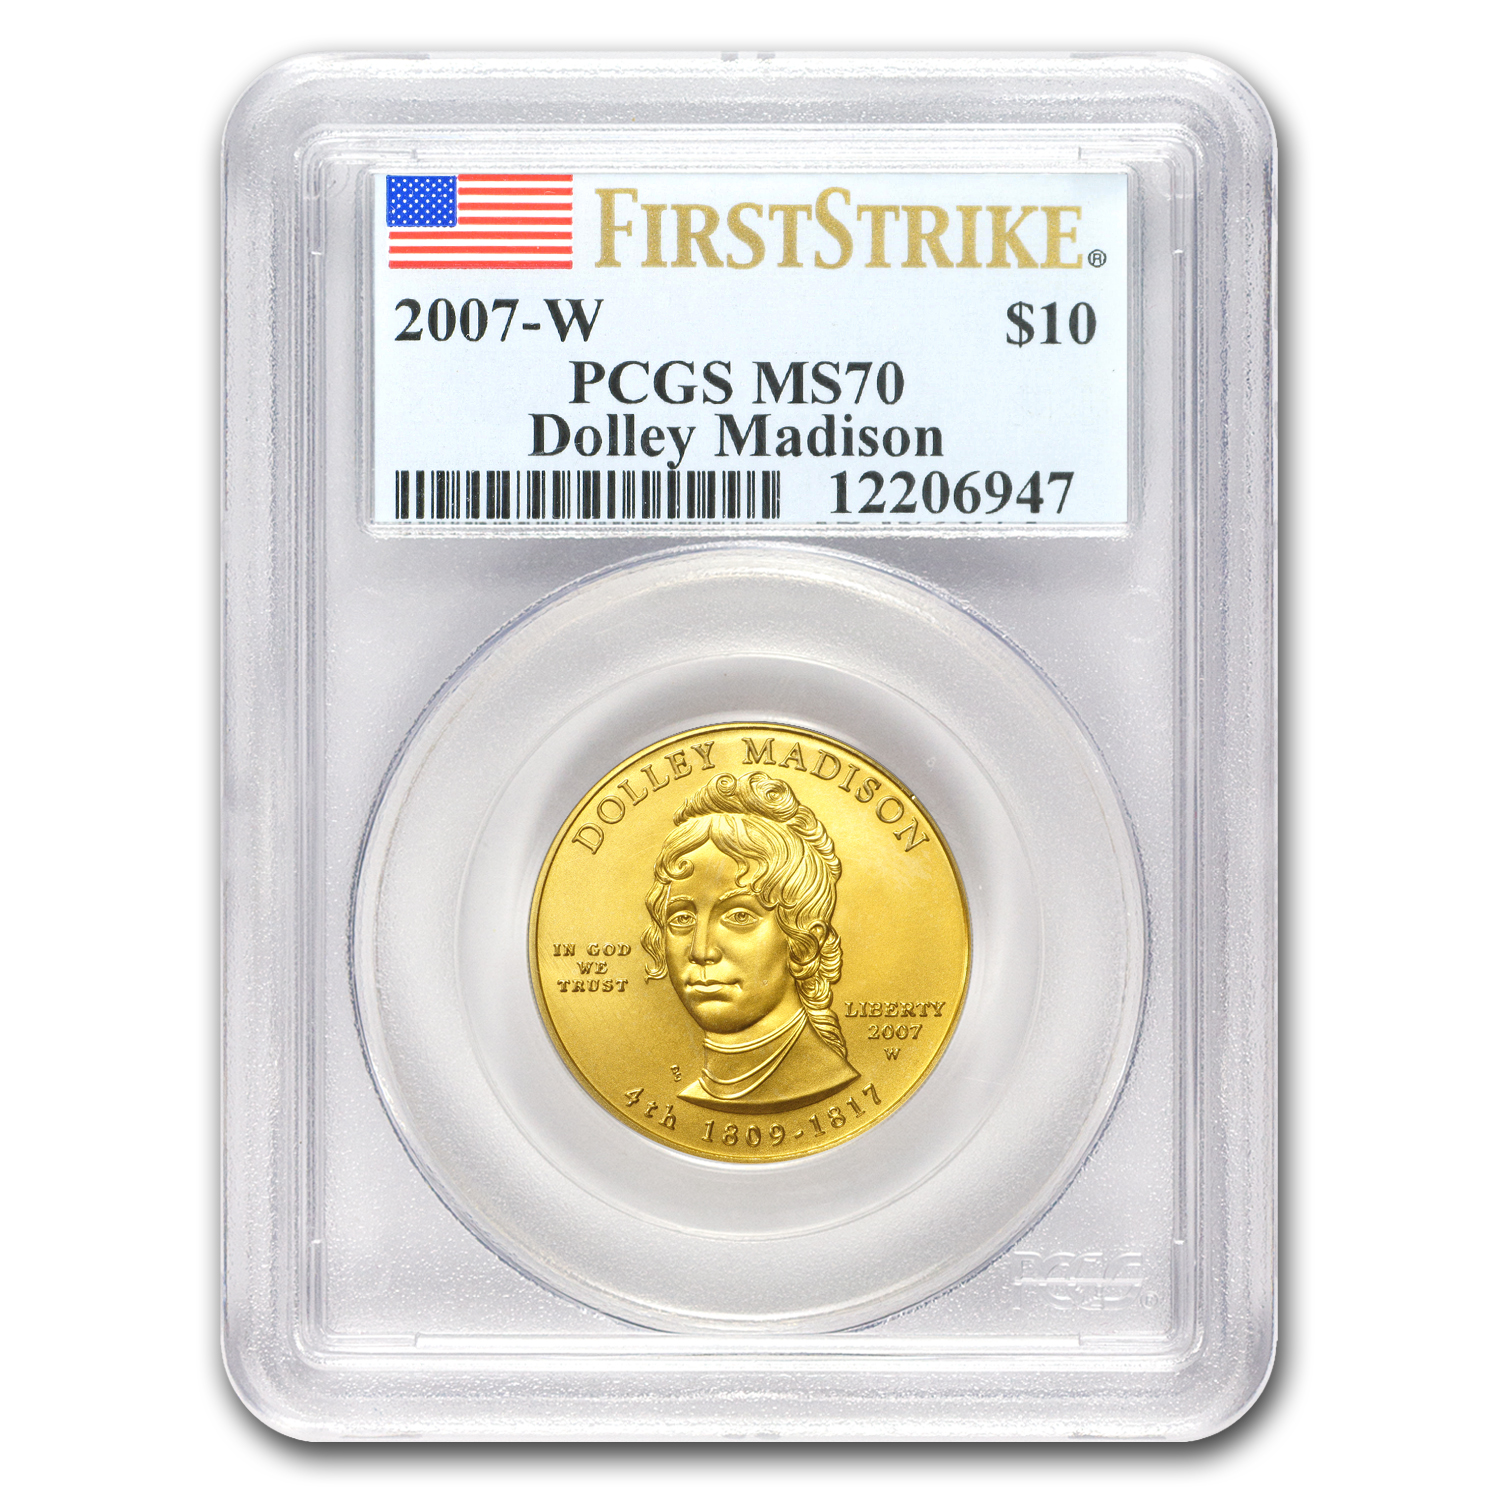 Buy 2007-W 1/2 oz Gold Dolley Madison MS-70 PCGS (FirstStrike?) - Click Image to Close